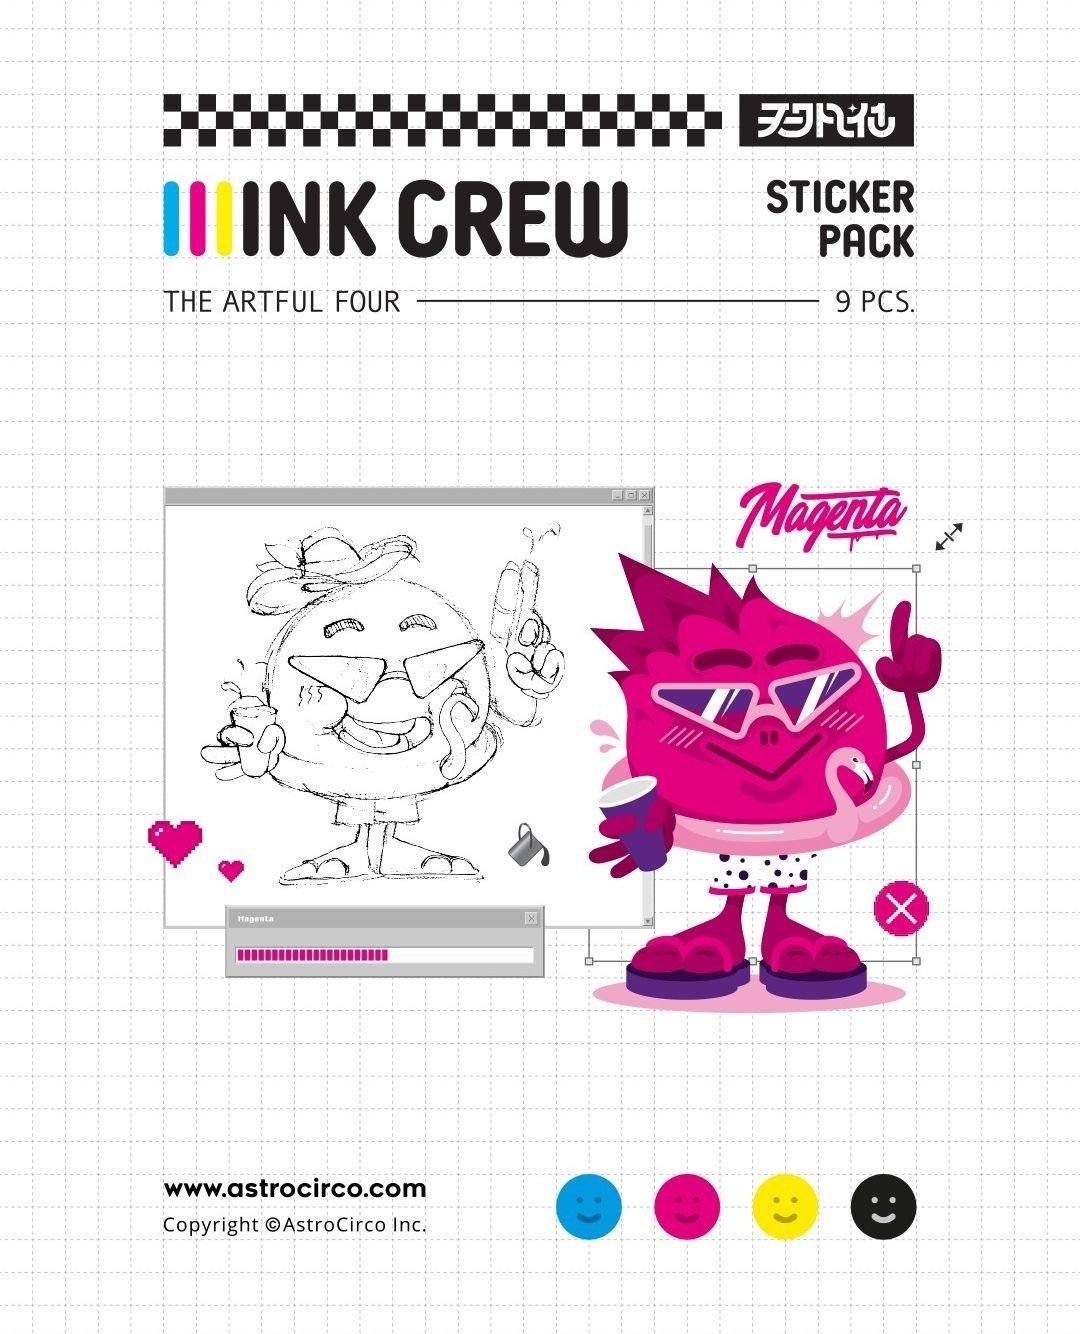 One of INK CREW characters, MAGENTA. 
A red dragon fruit 🩷
The new sticker pack is now available on our shop. ⁠
.⁠
.⁠
.⁠
#astrocircostudio #CMYK #INK #adobe #behance #graphicdesign #stickyfinger #magenta #digitalillustration #ipaddrawing #stickers #